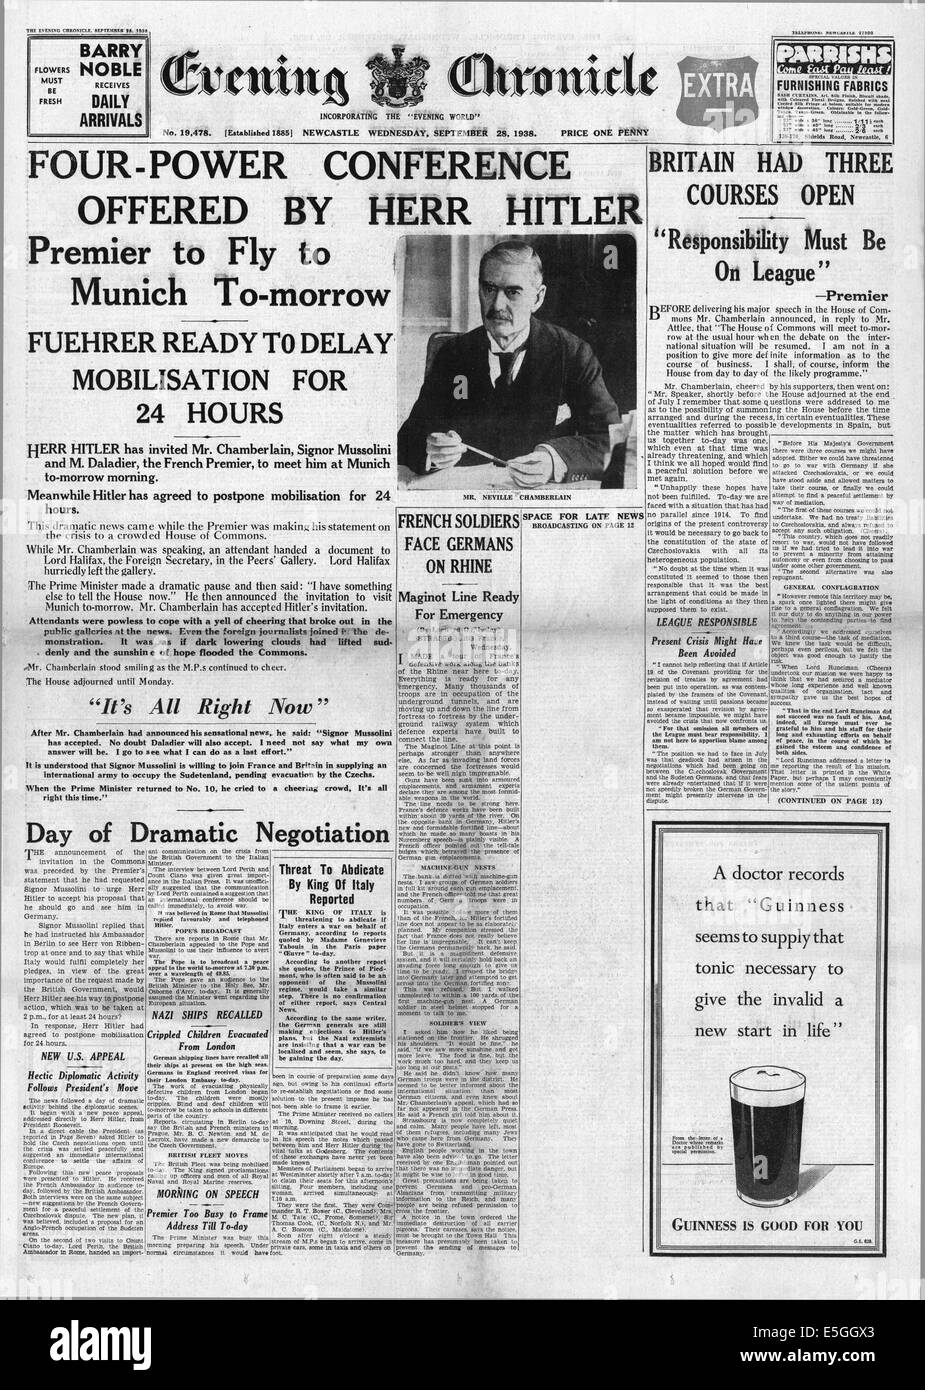 1938 Evening Chronicle (Manchester) front page reporting Chamberlain to meet Hitler, Mussolini and Daladier for peace talks Stock Photo